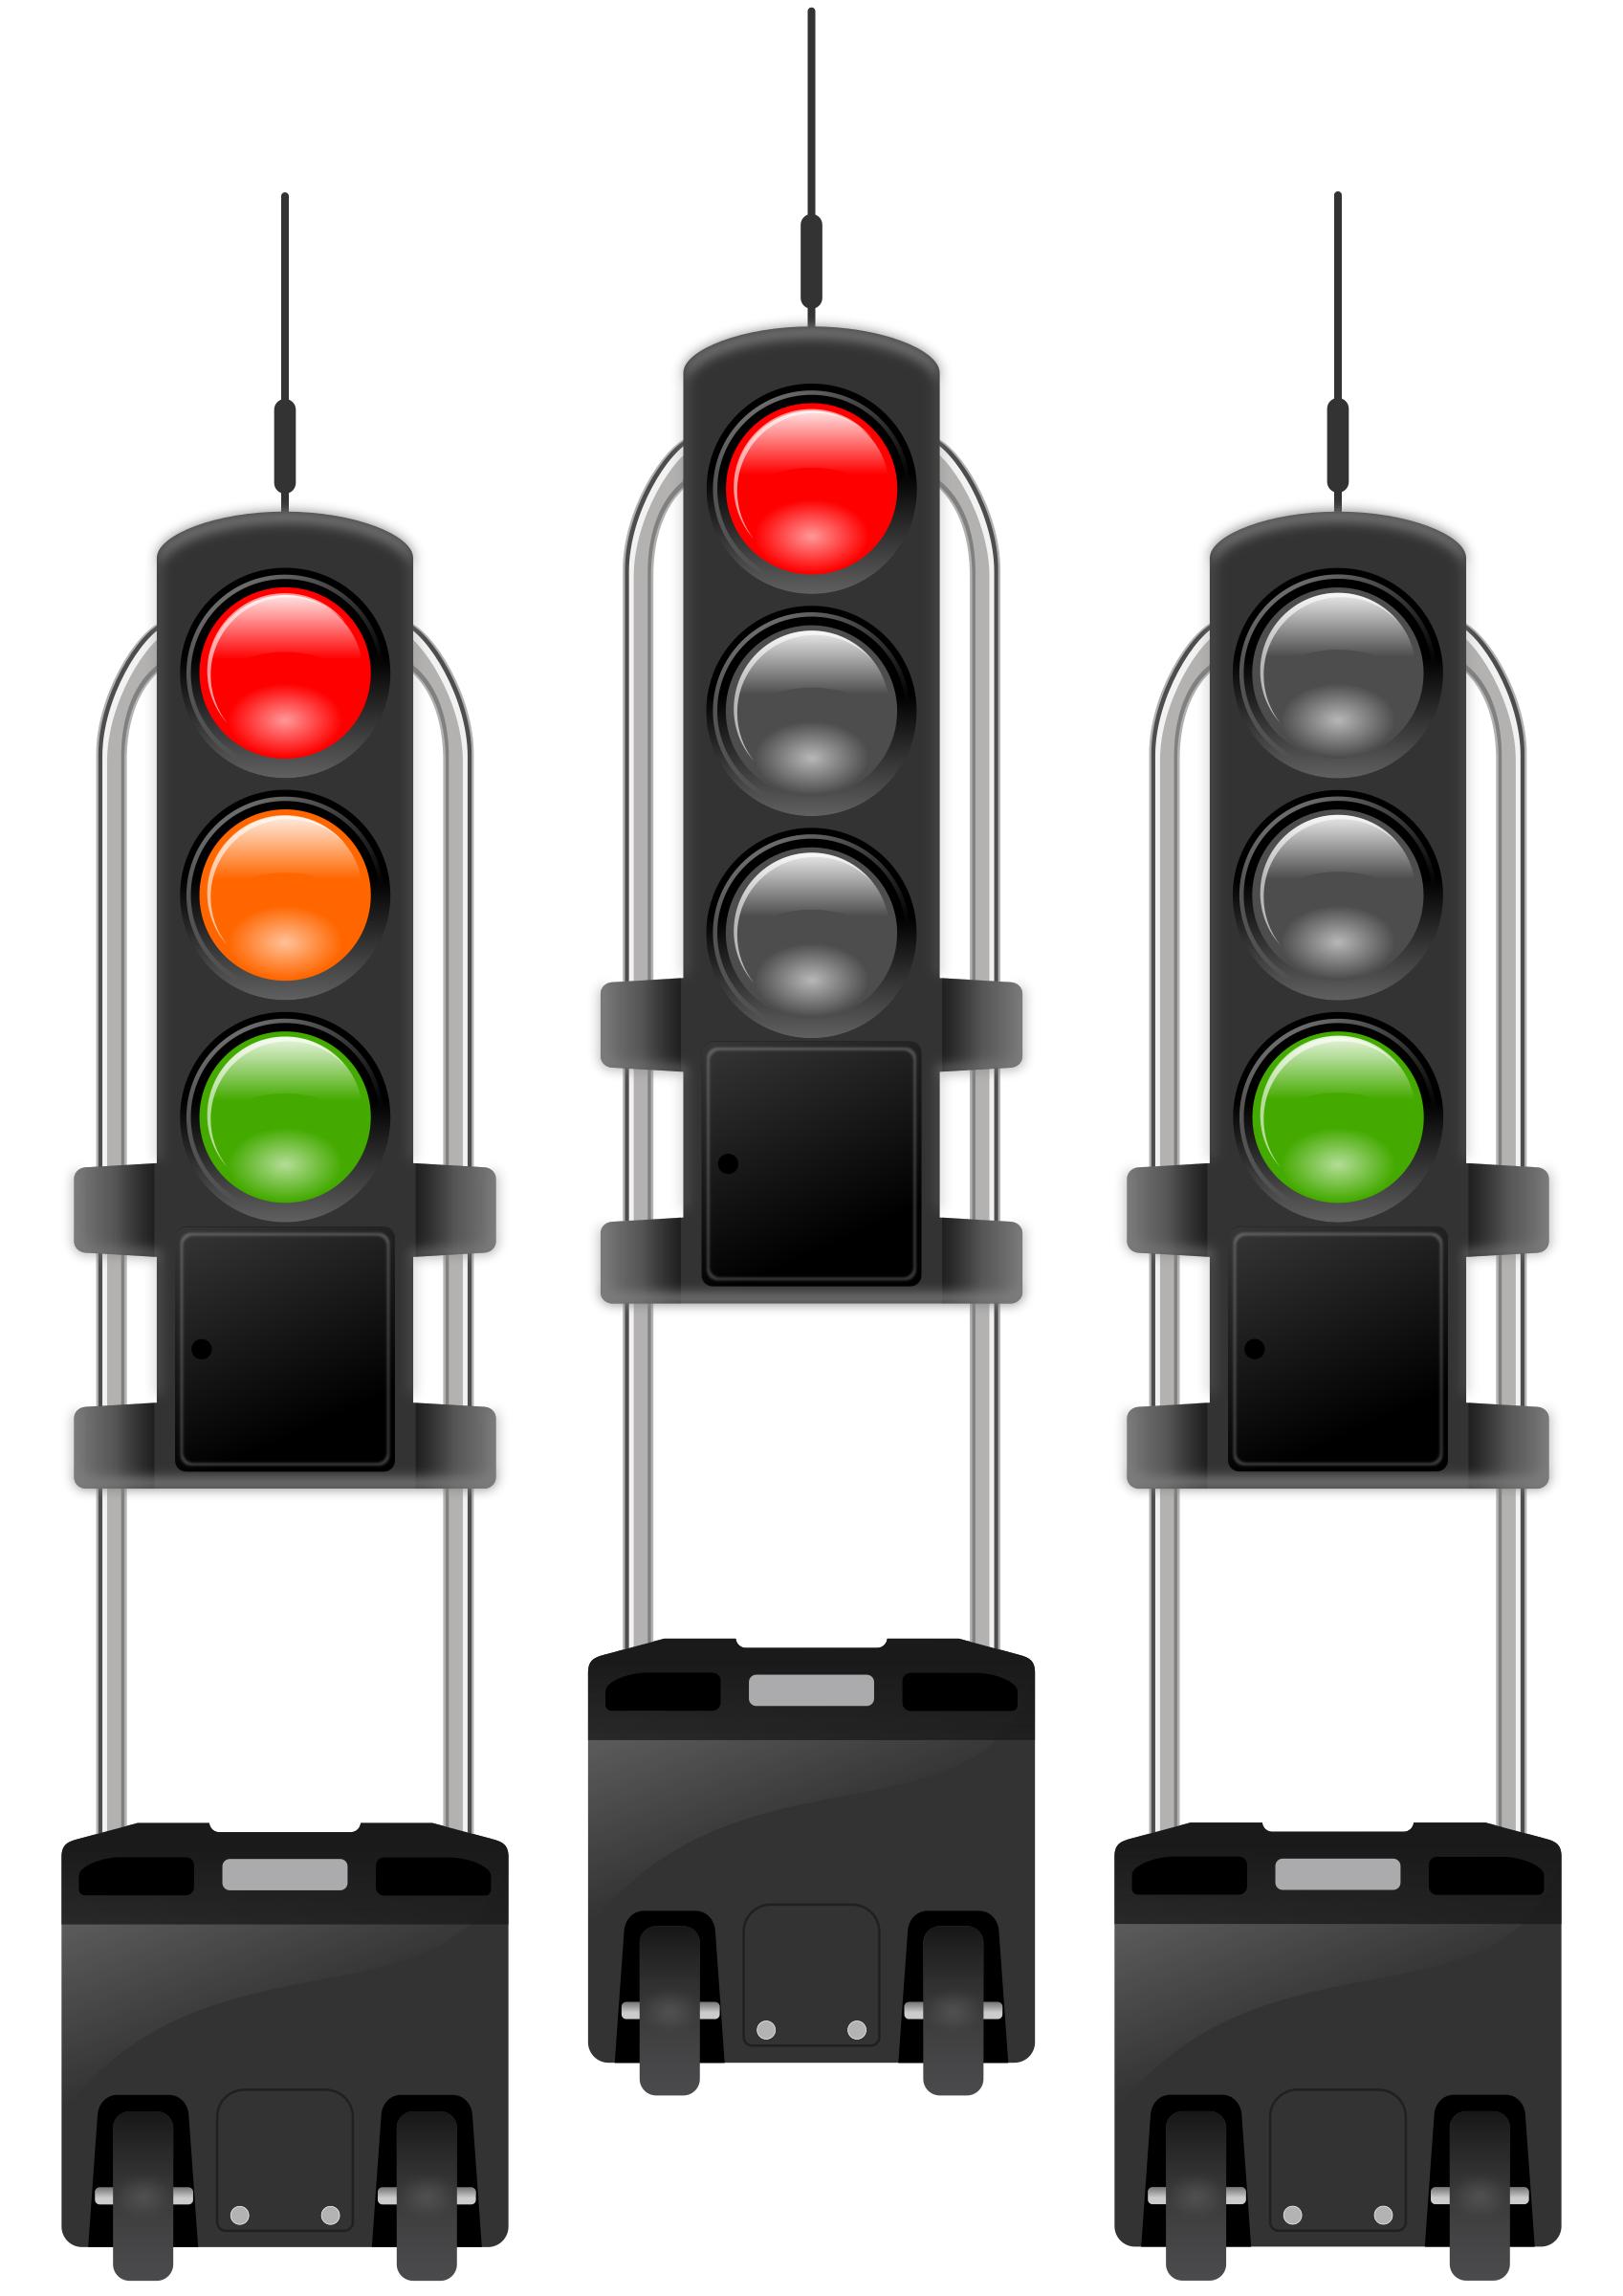 mobile traffic-lights threesome png